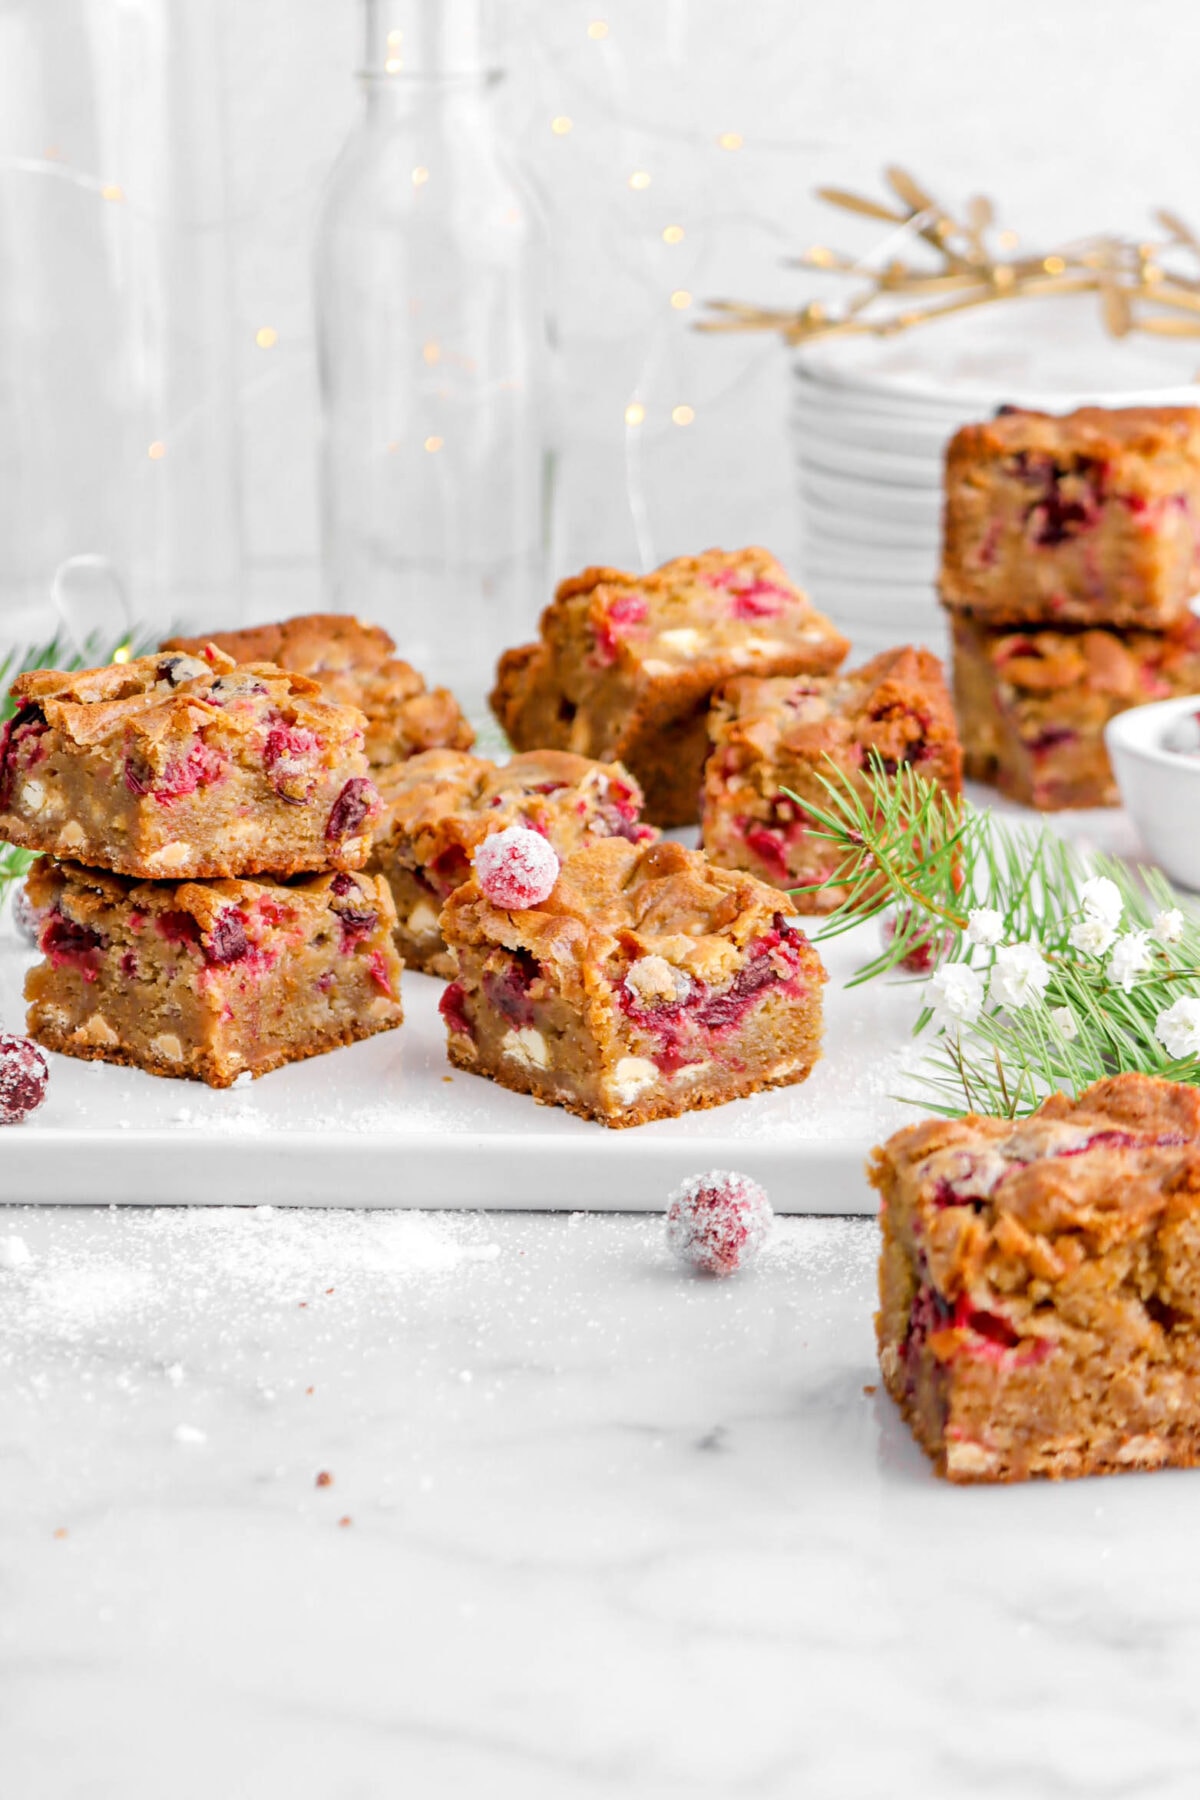 cranberry white chocolate blondies on white tray with pine greenery and sugared cranberries around.